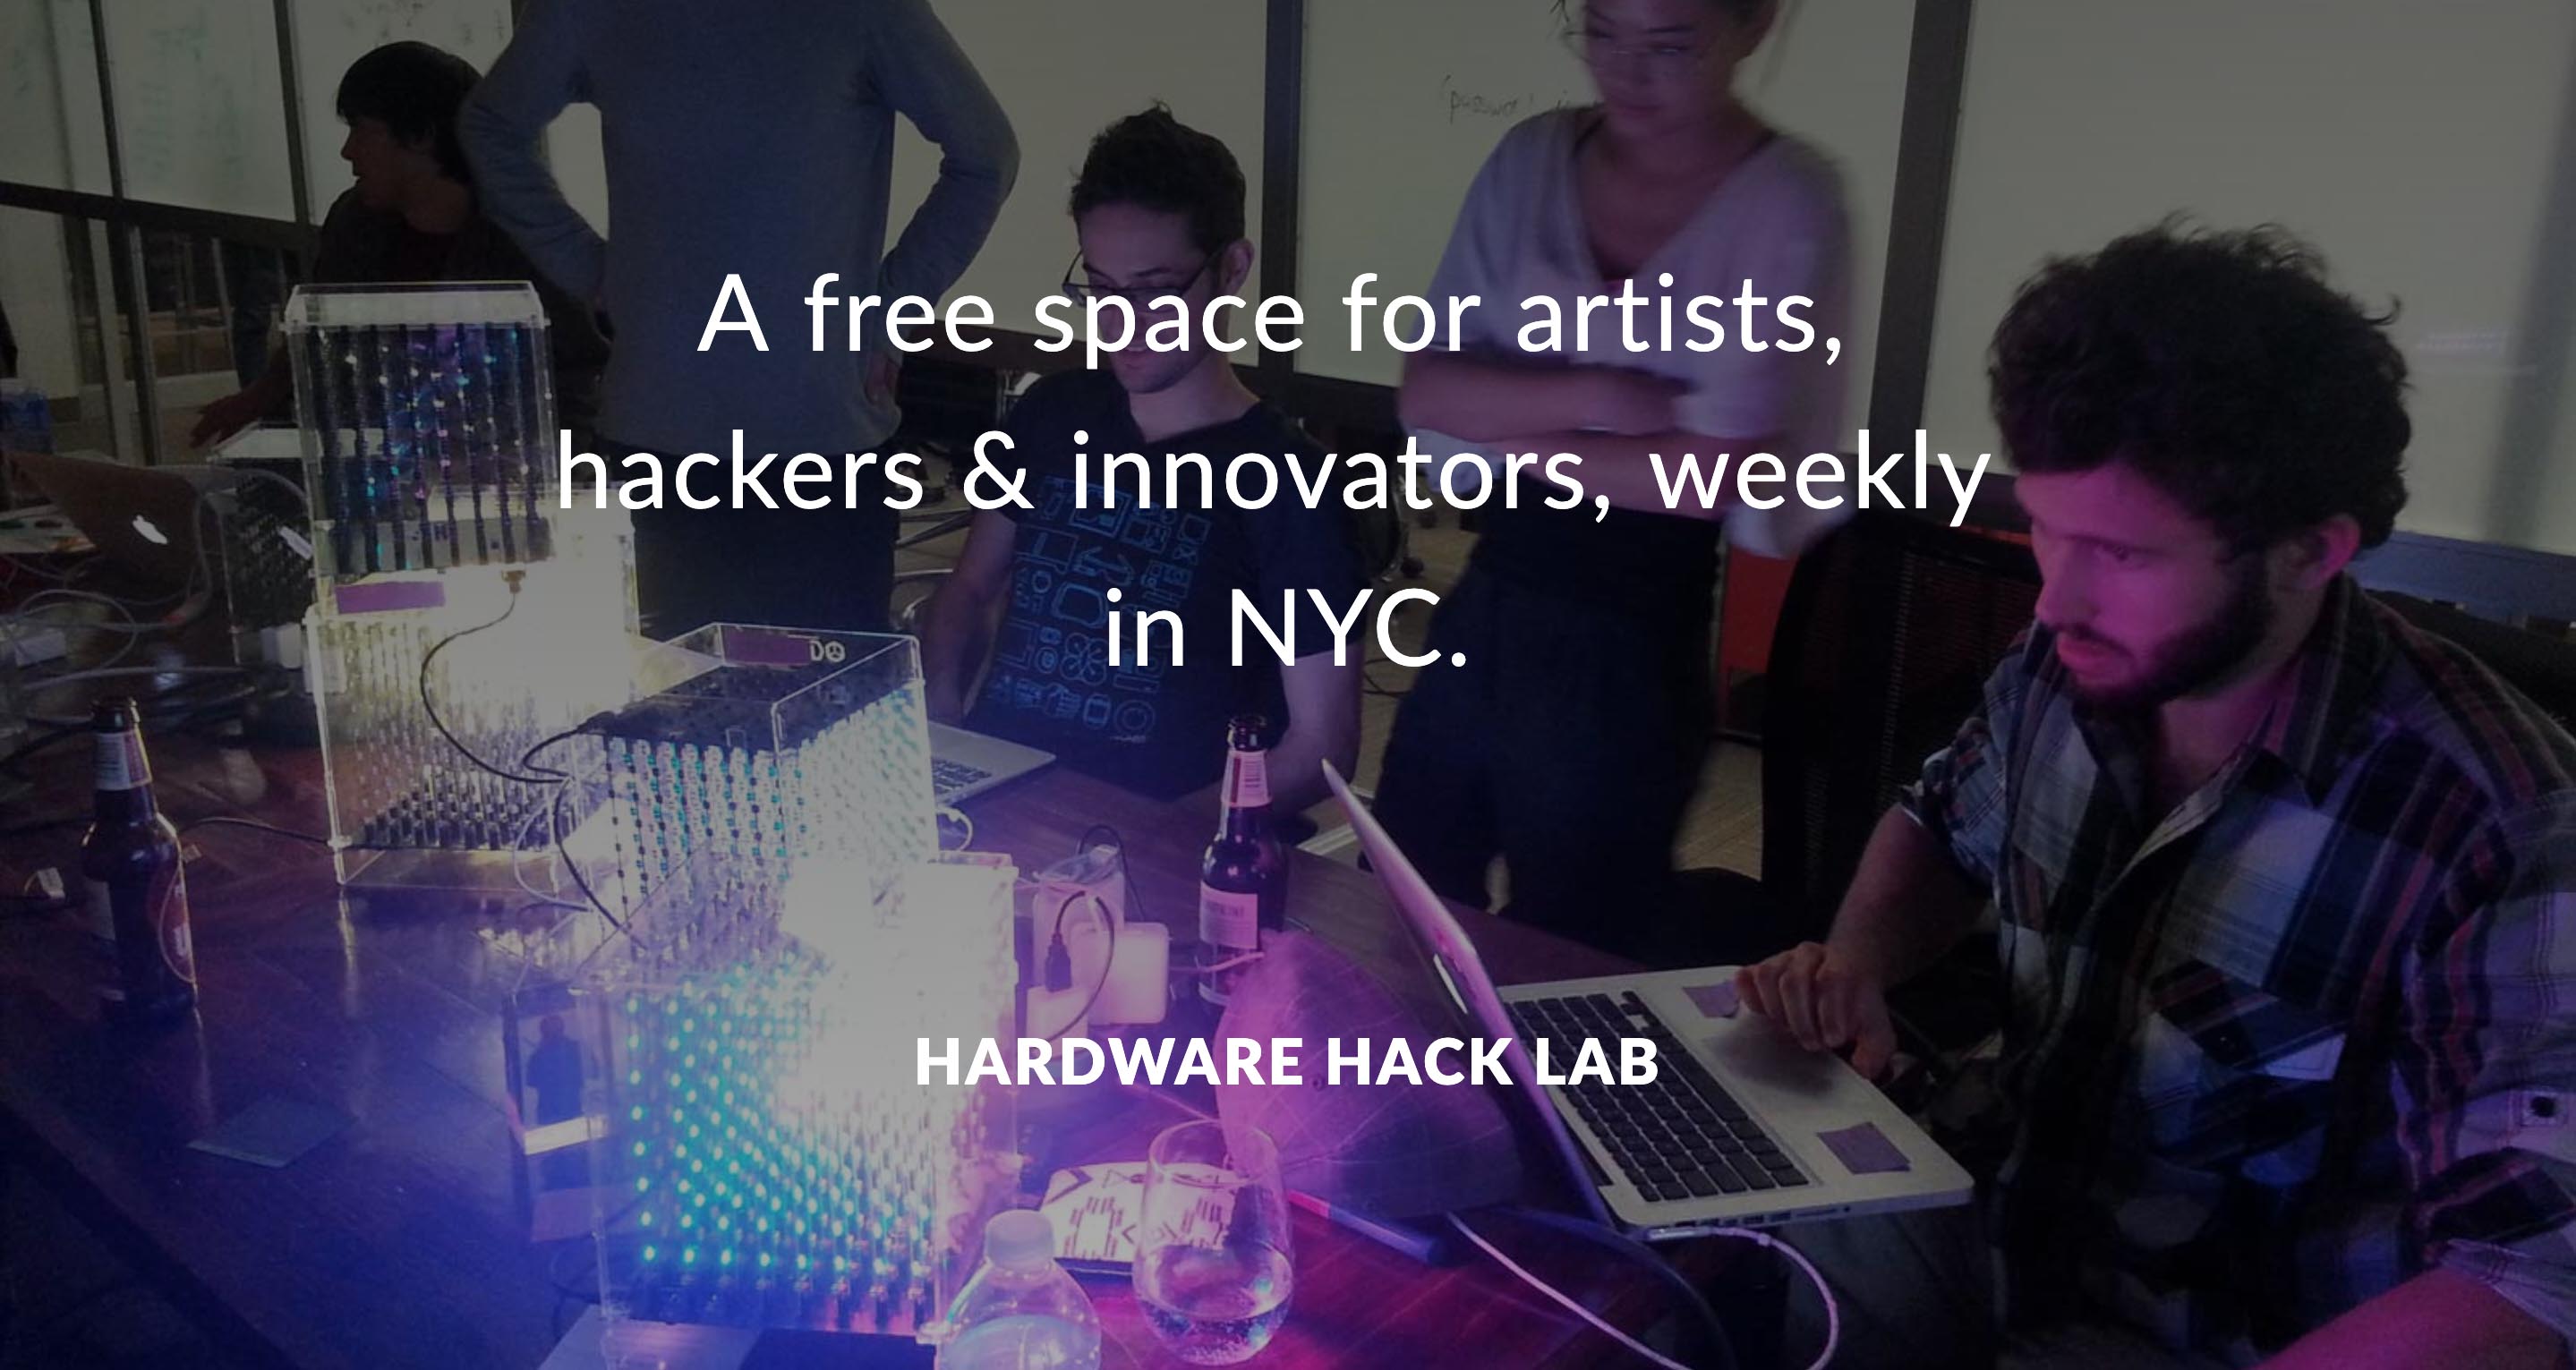 The Hardware Hack Lab is a free space for artists, hackers and innovators every week in New York City